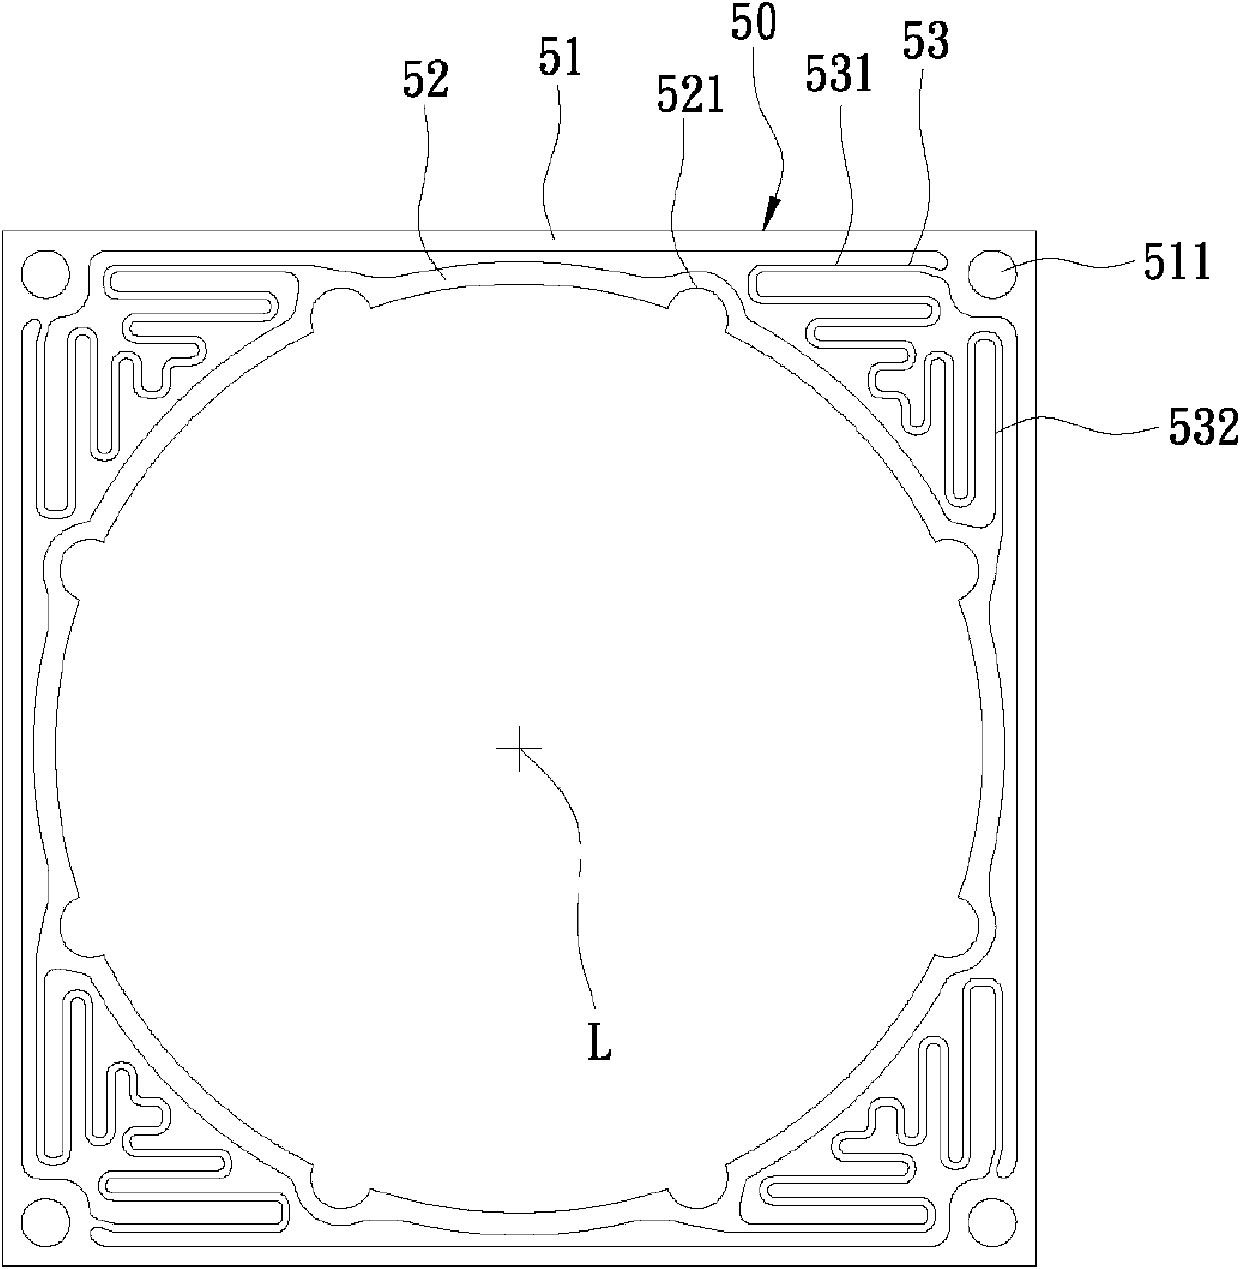 Lens module capable of switching focuses